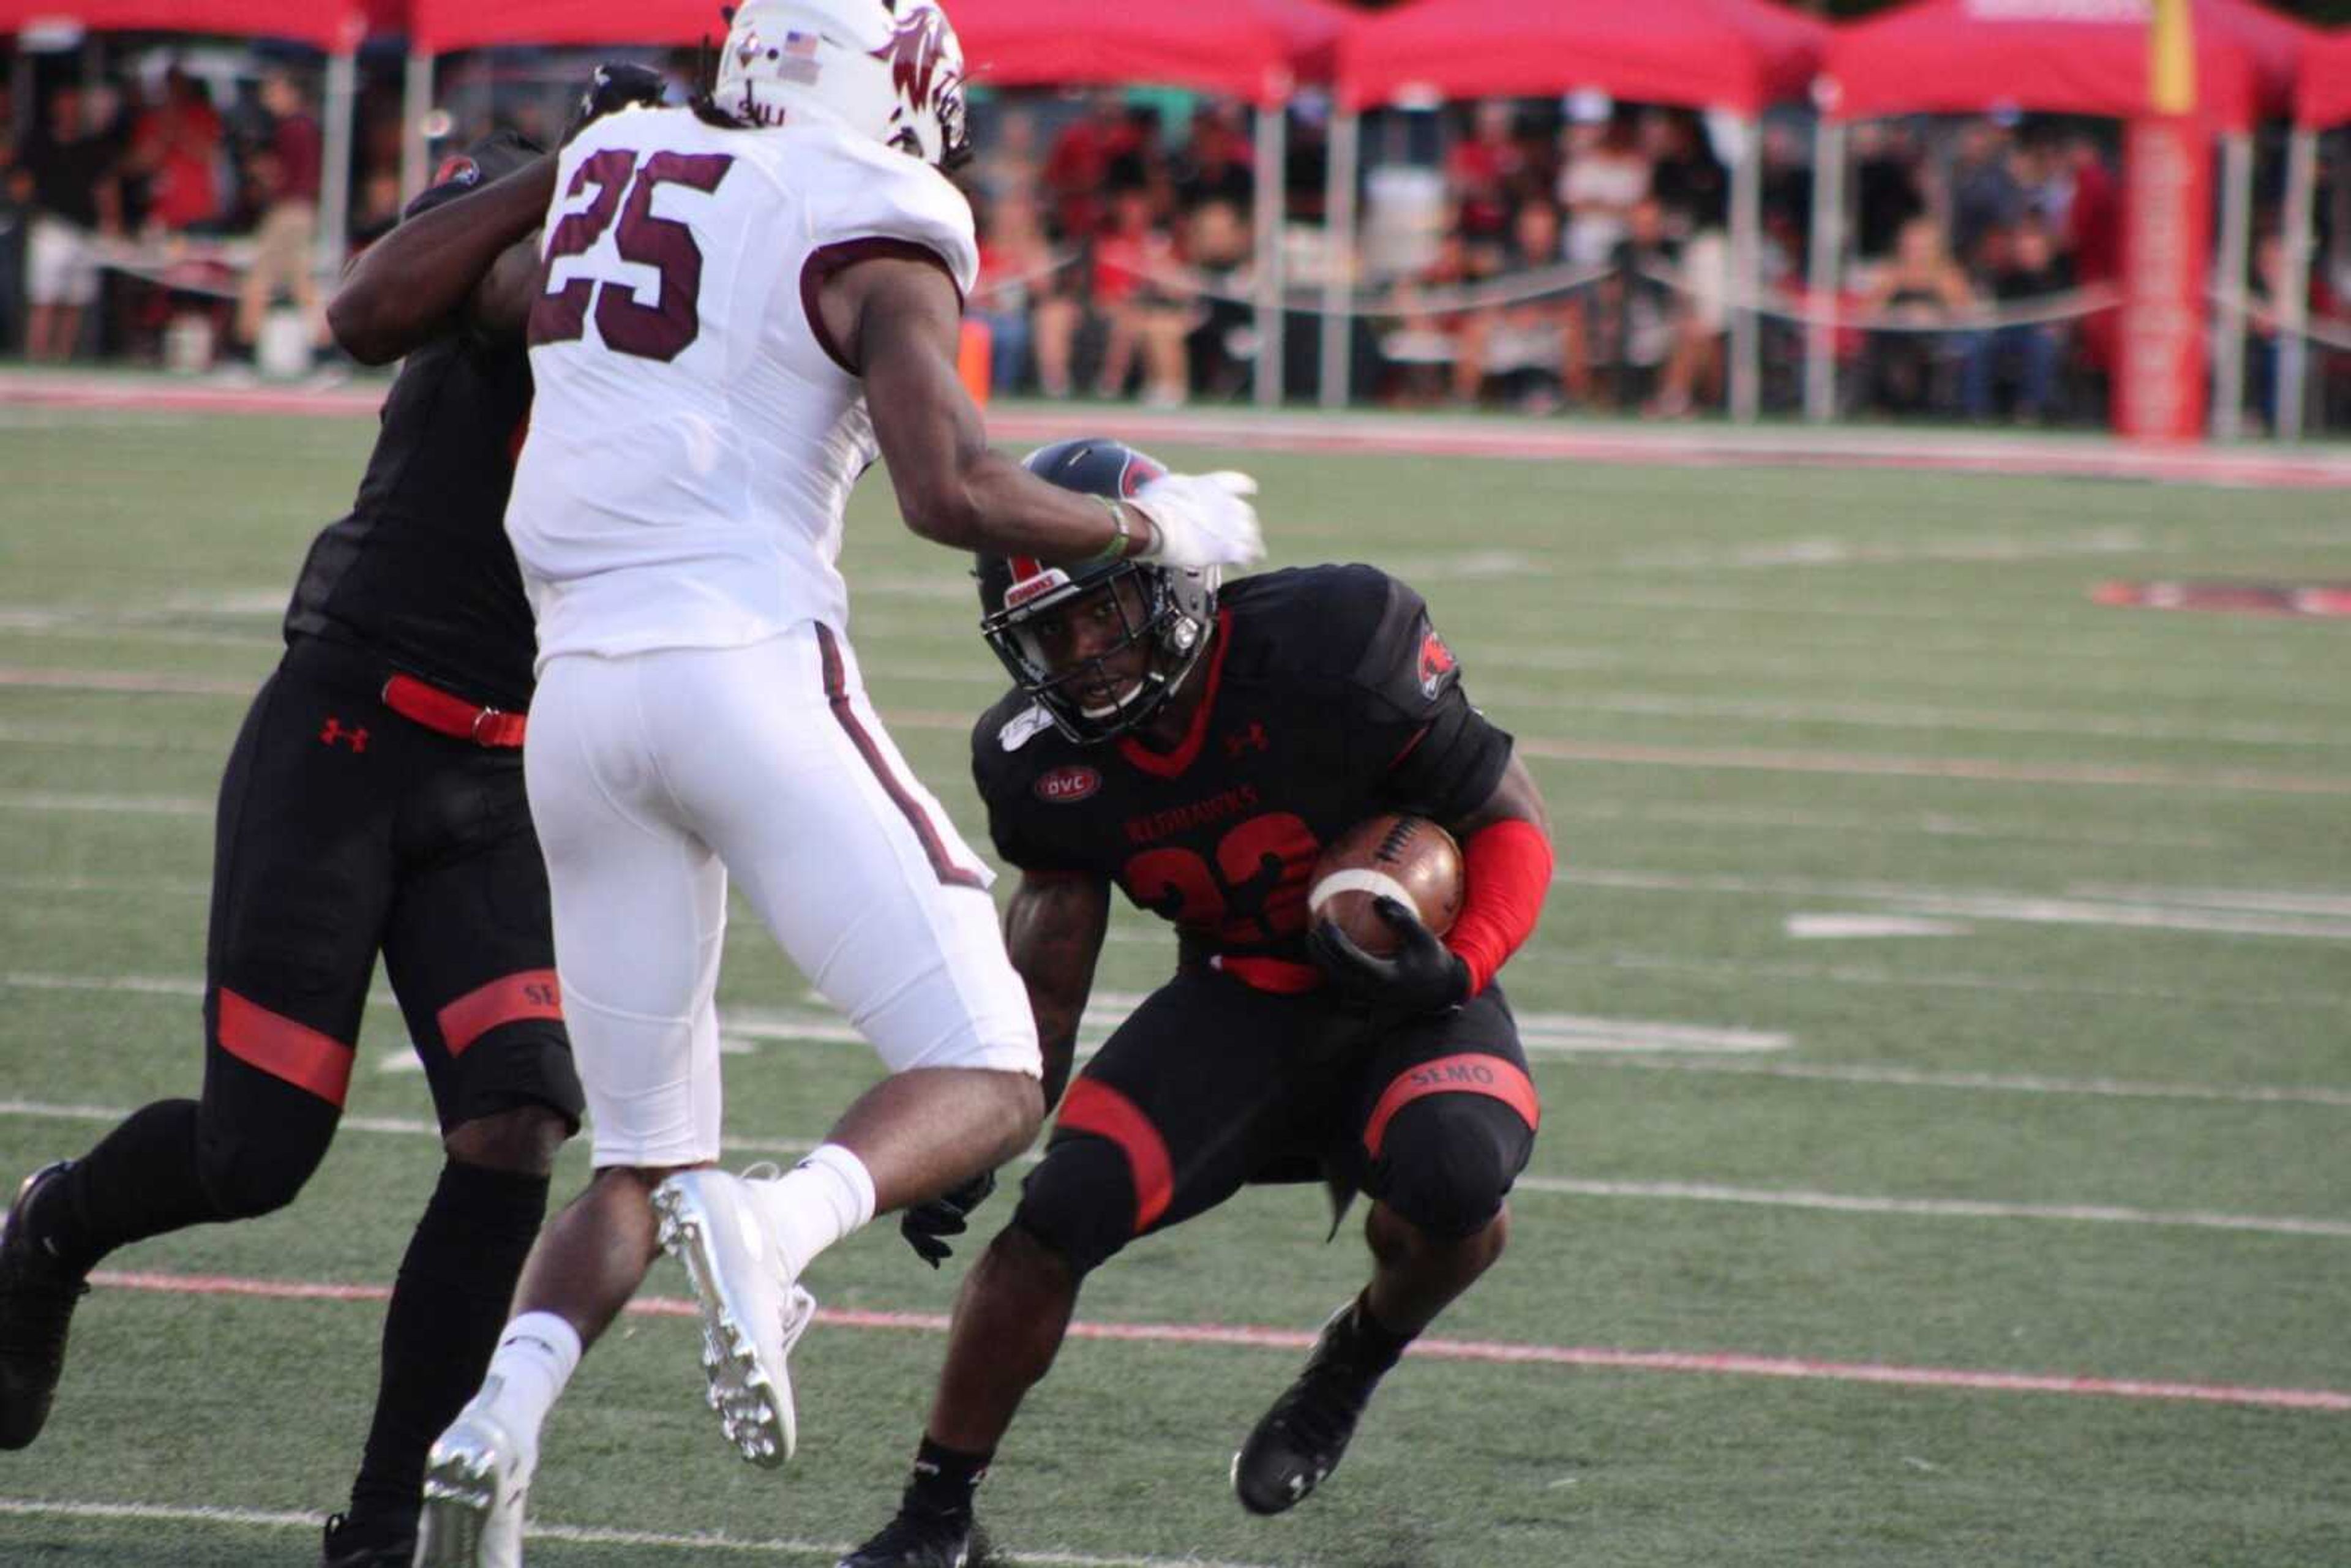 Redhawks sophomore running back Zion Custis makes a juke move to pick up additional yardage against Southern Illinois. 